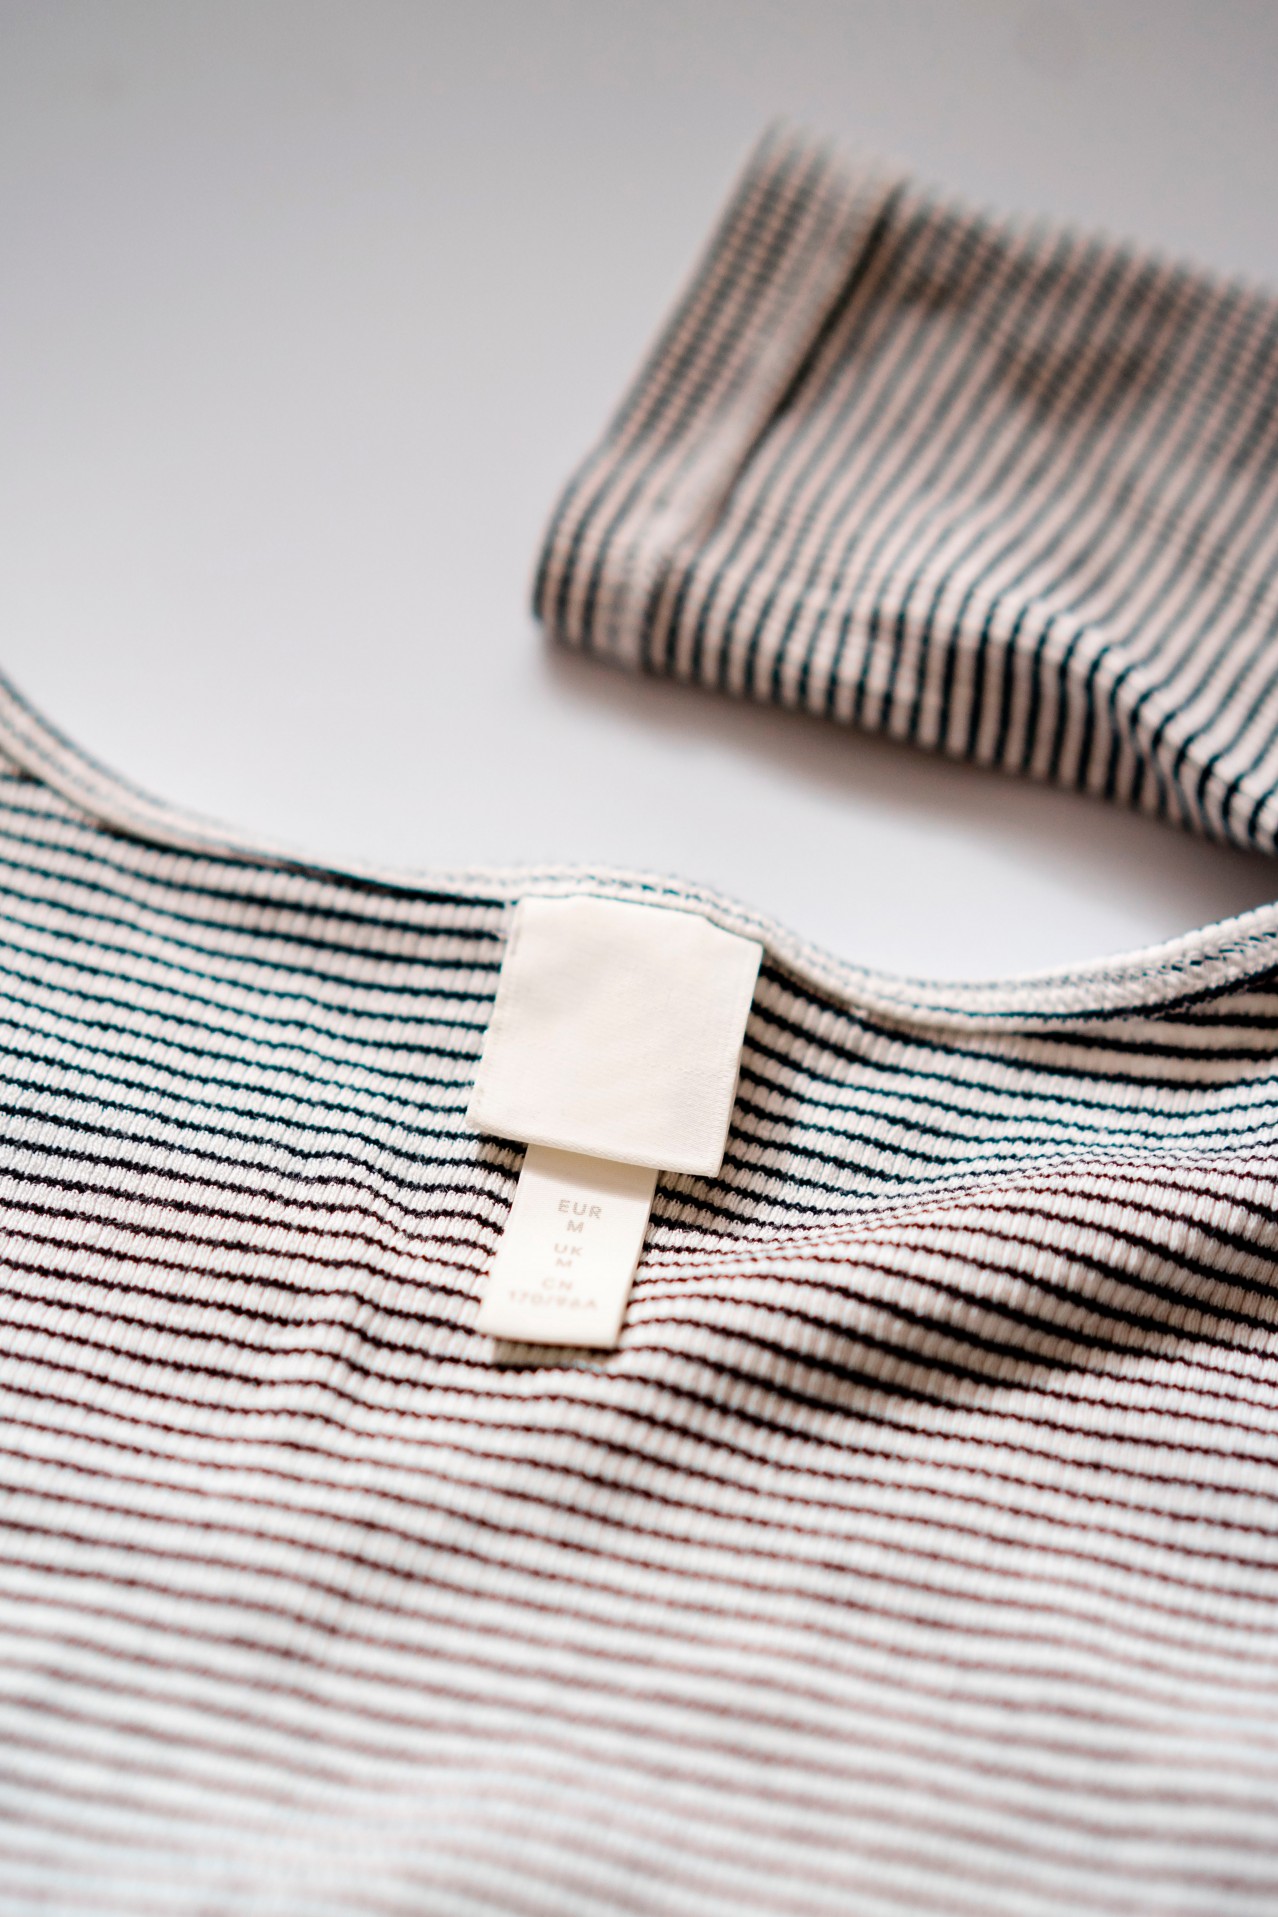 Striped shirt with label tag